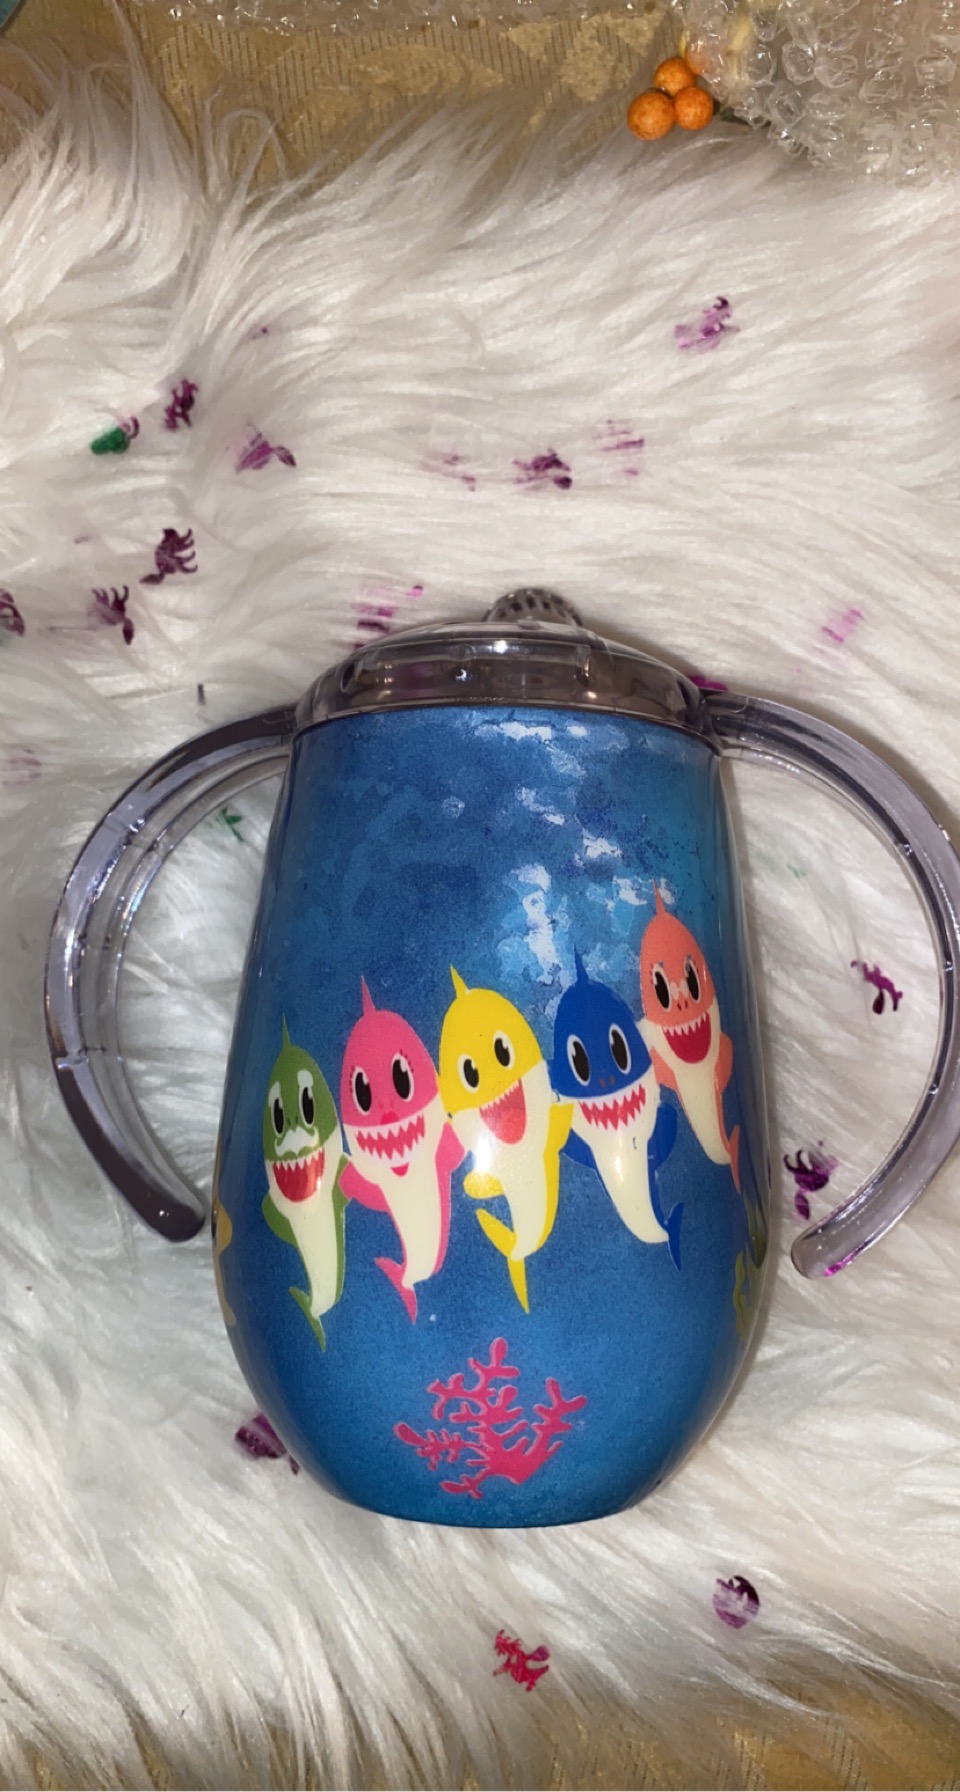 Baby Shark Sippy Cup